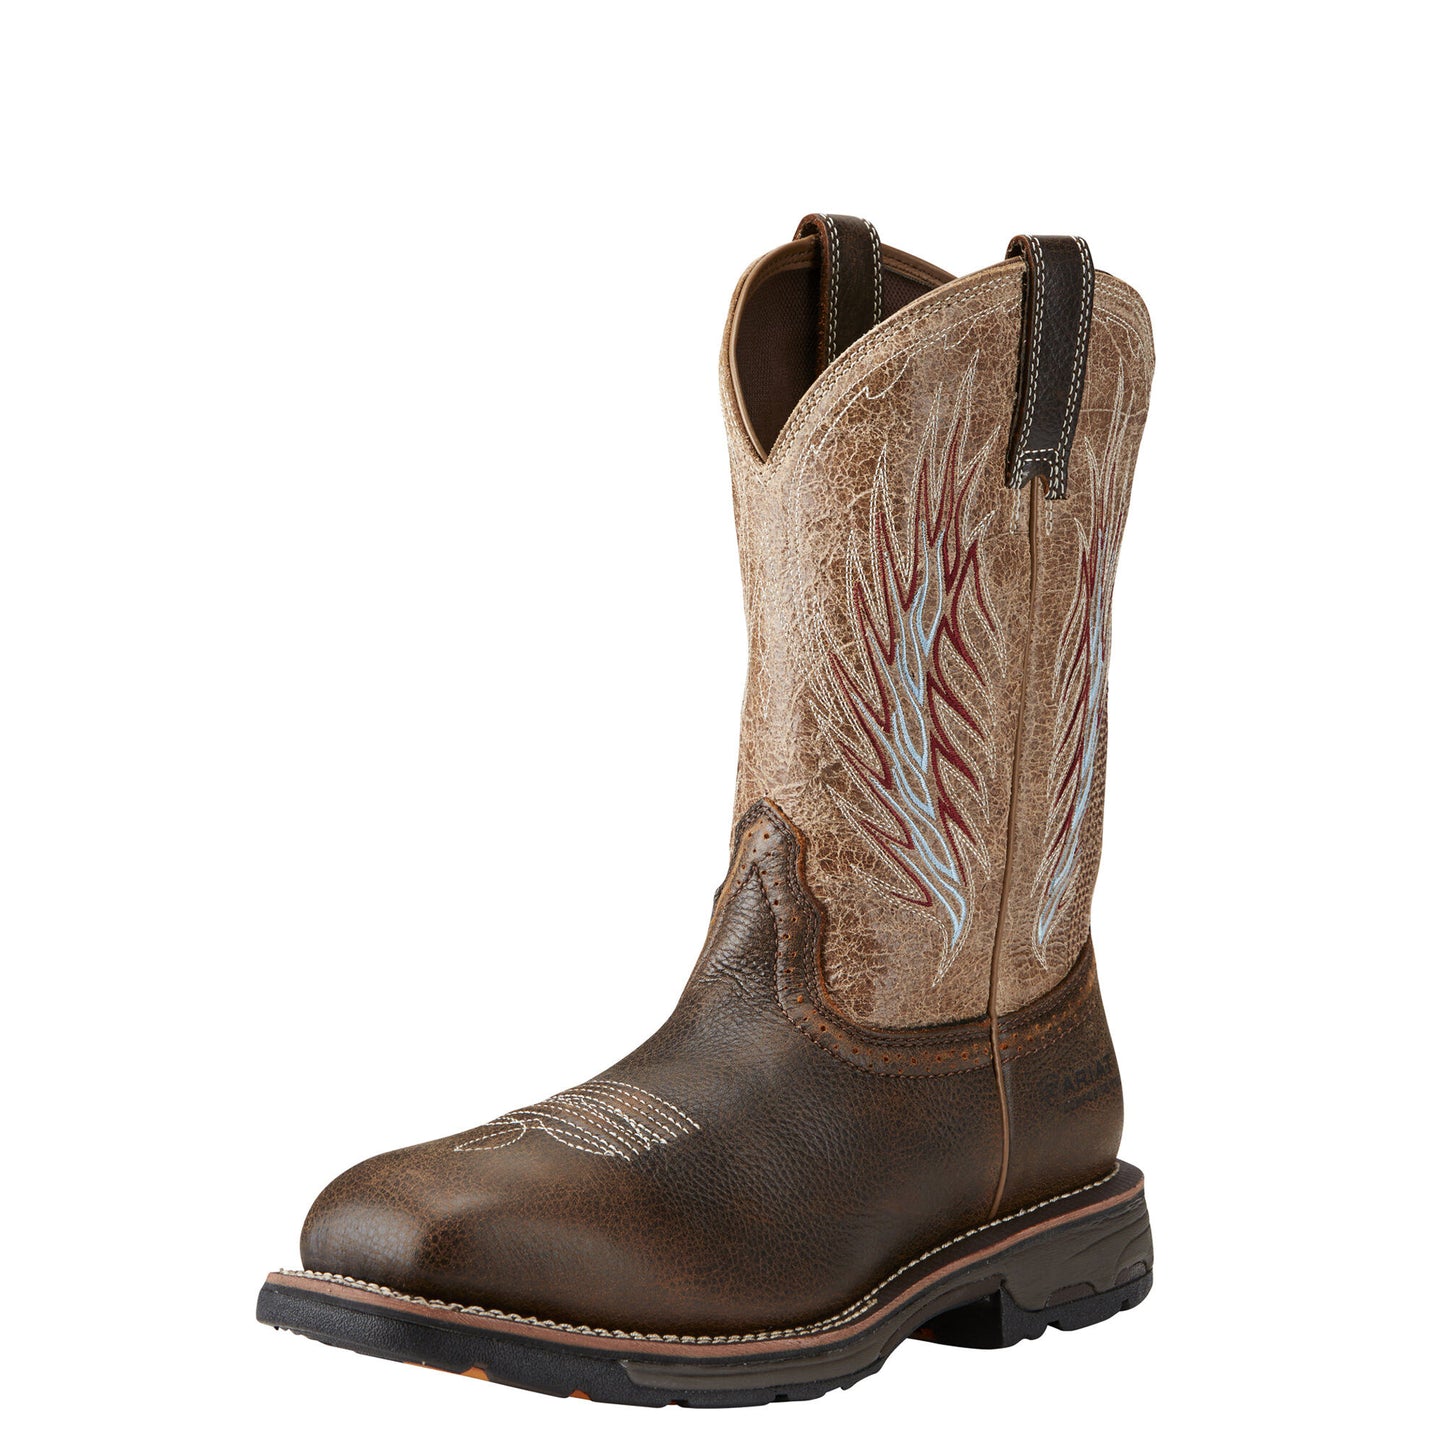 Ariat Men's WorkHog Mesteno II Composite Toe Boot - Rustic Brown/Stone - French's Boots